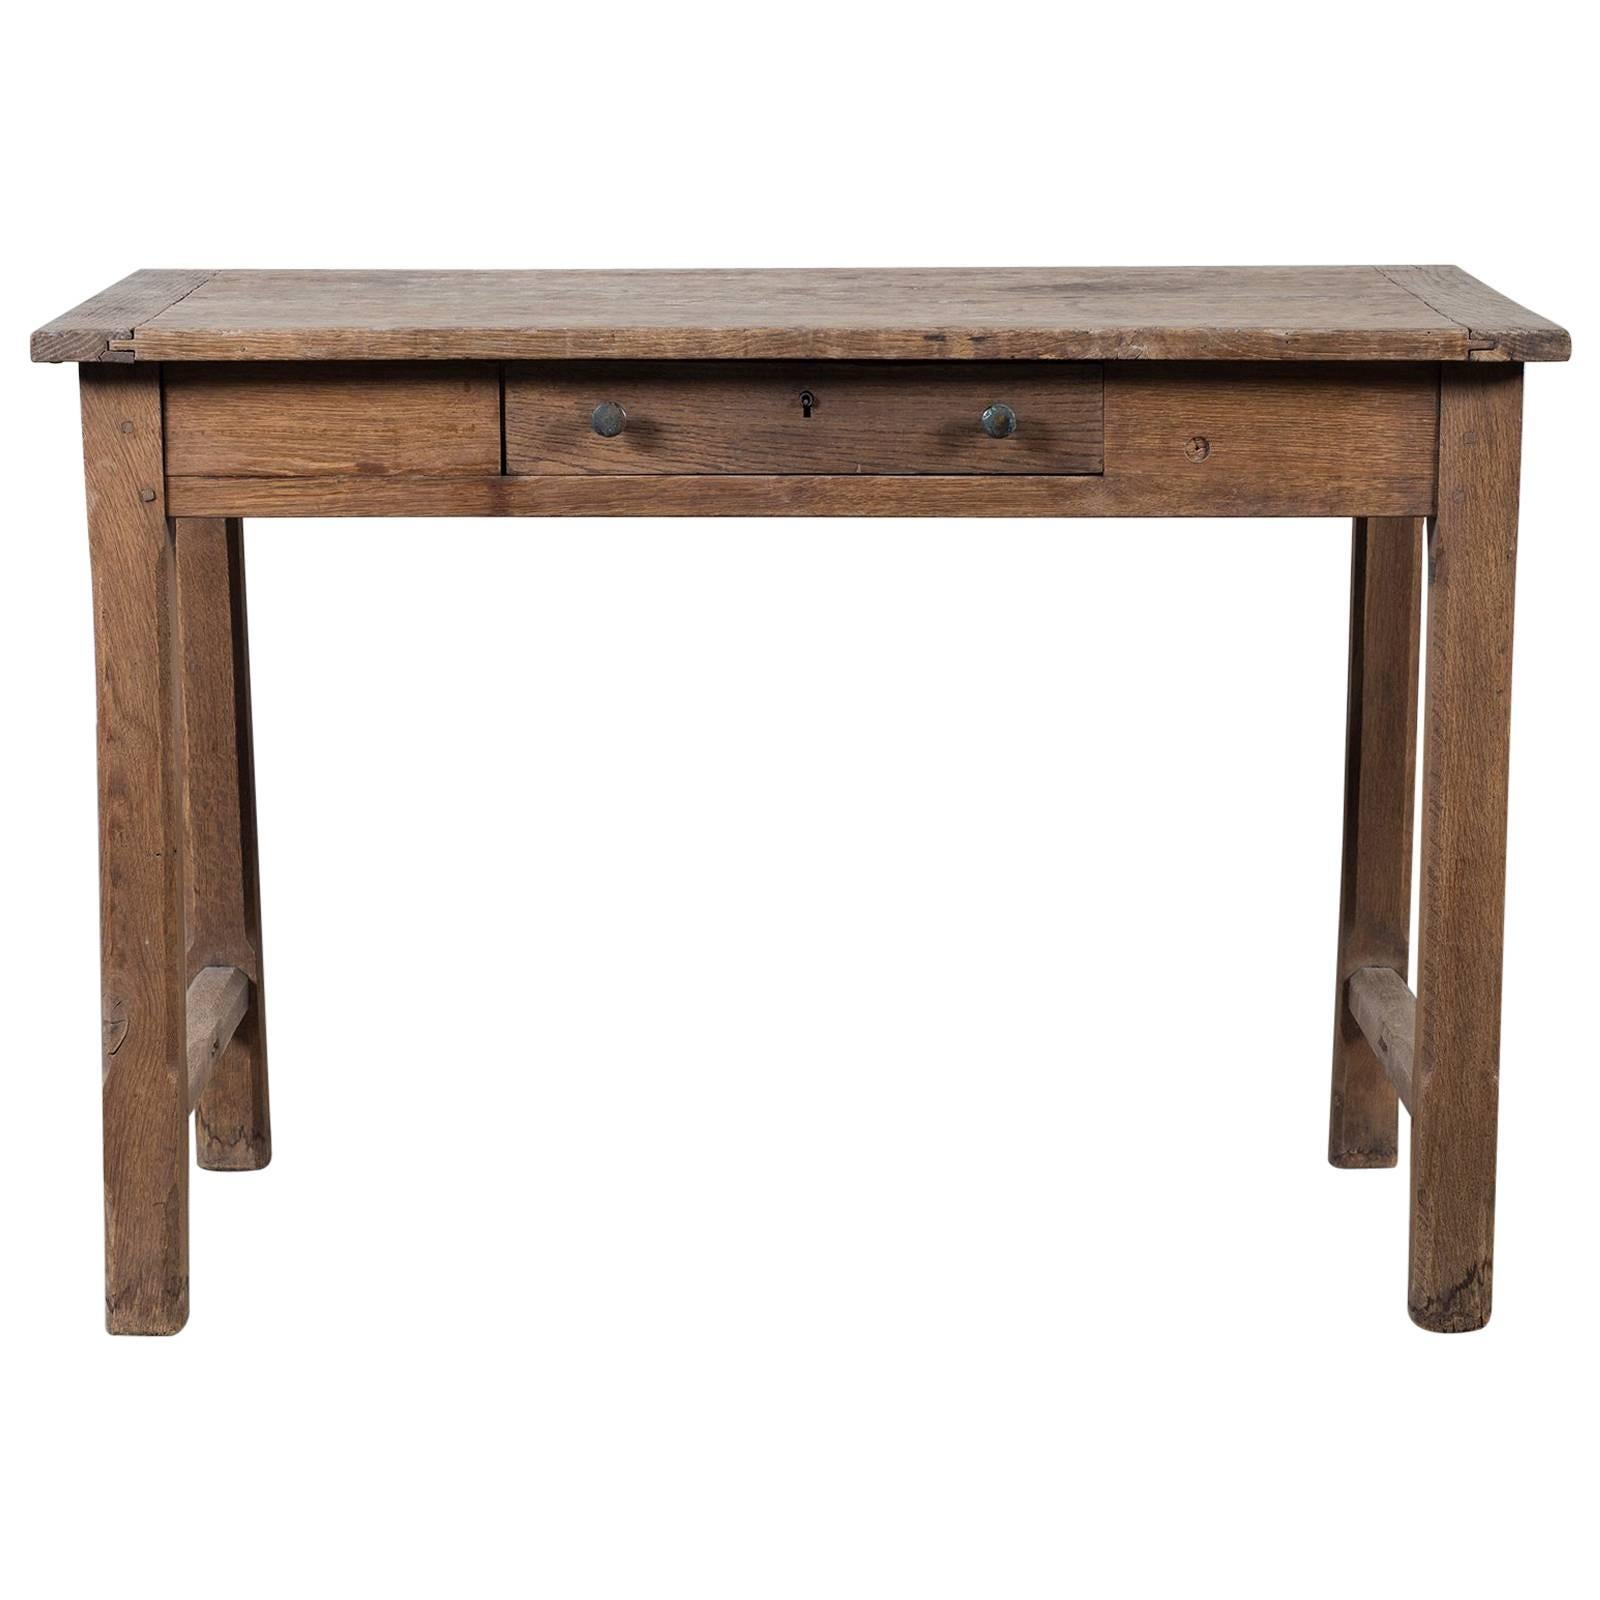 Antique French Louis Philippe Oak Table Having a Drawer, circa 1850